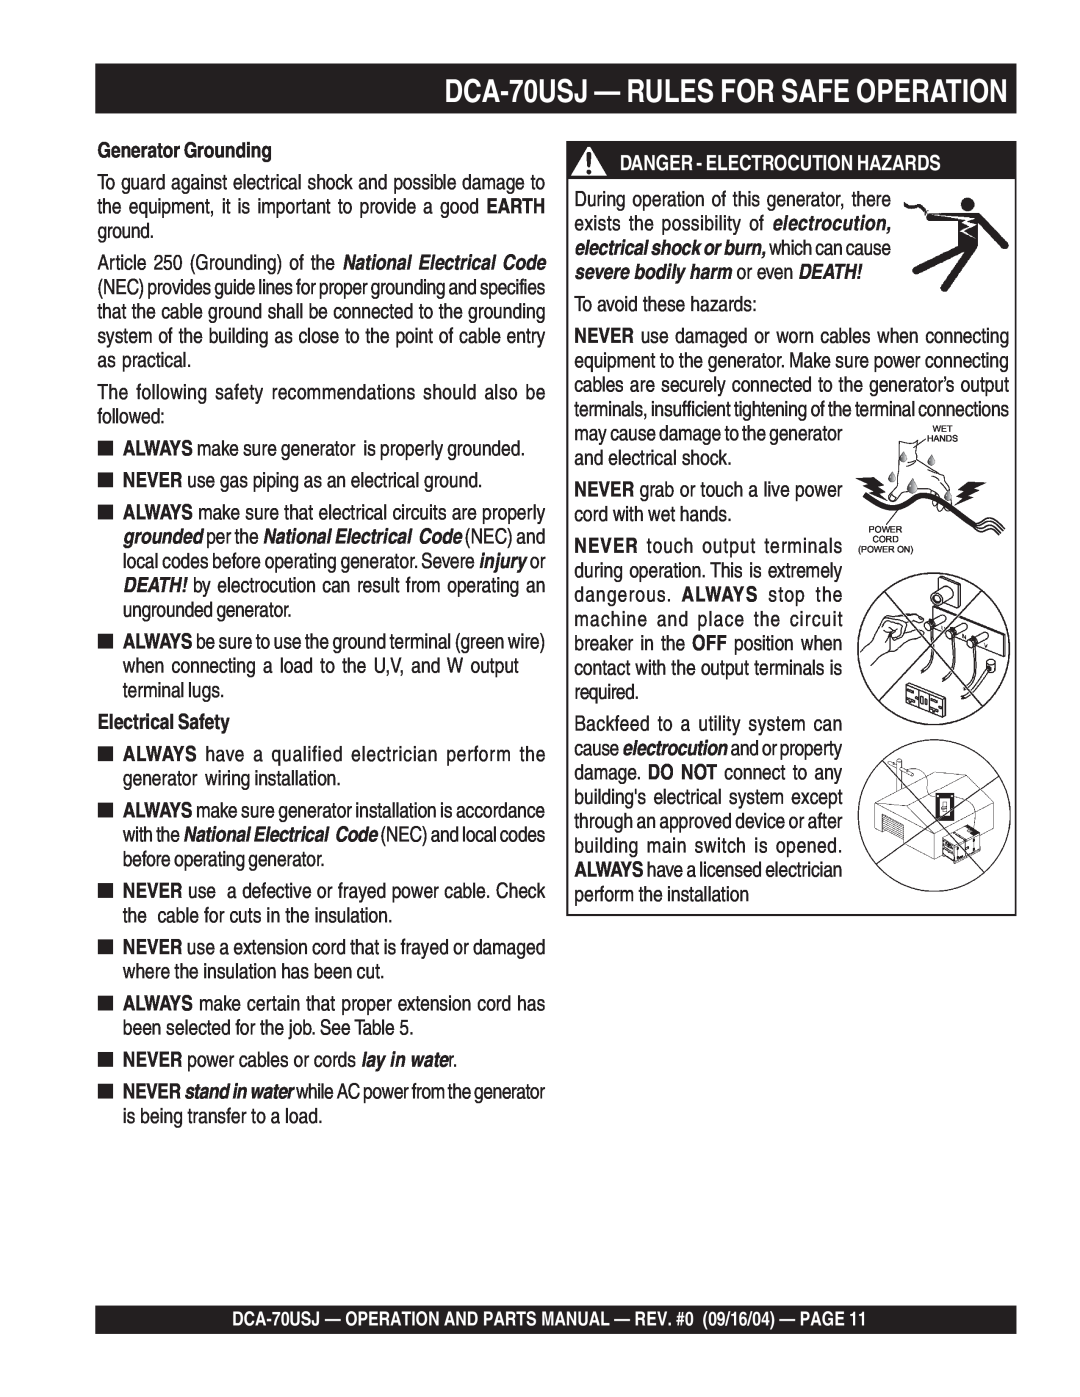 Multiquip dca-70usj operation manual DCA-70USJ— RULES FOR SAFE OPERATION, Generator Grounding, Electrical Safety 